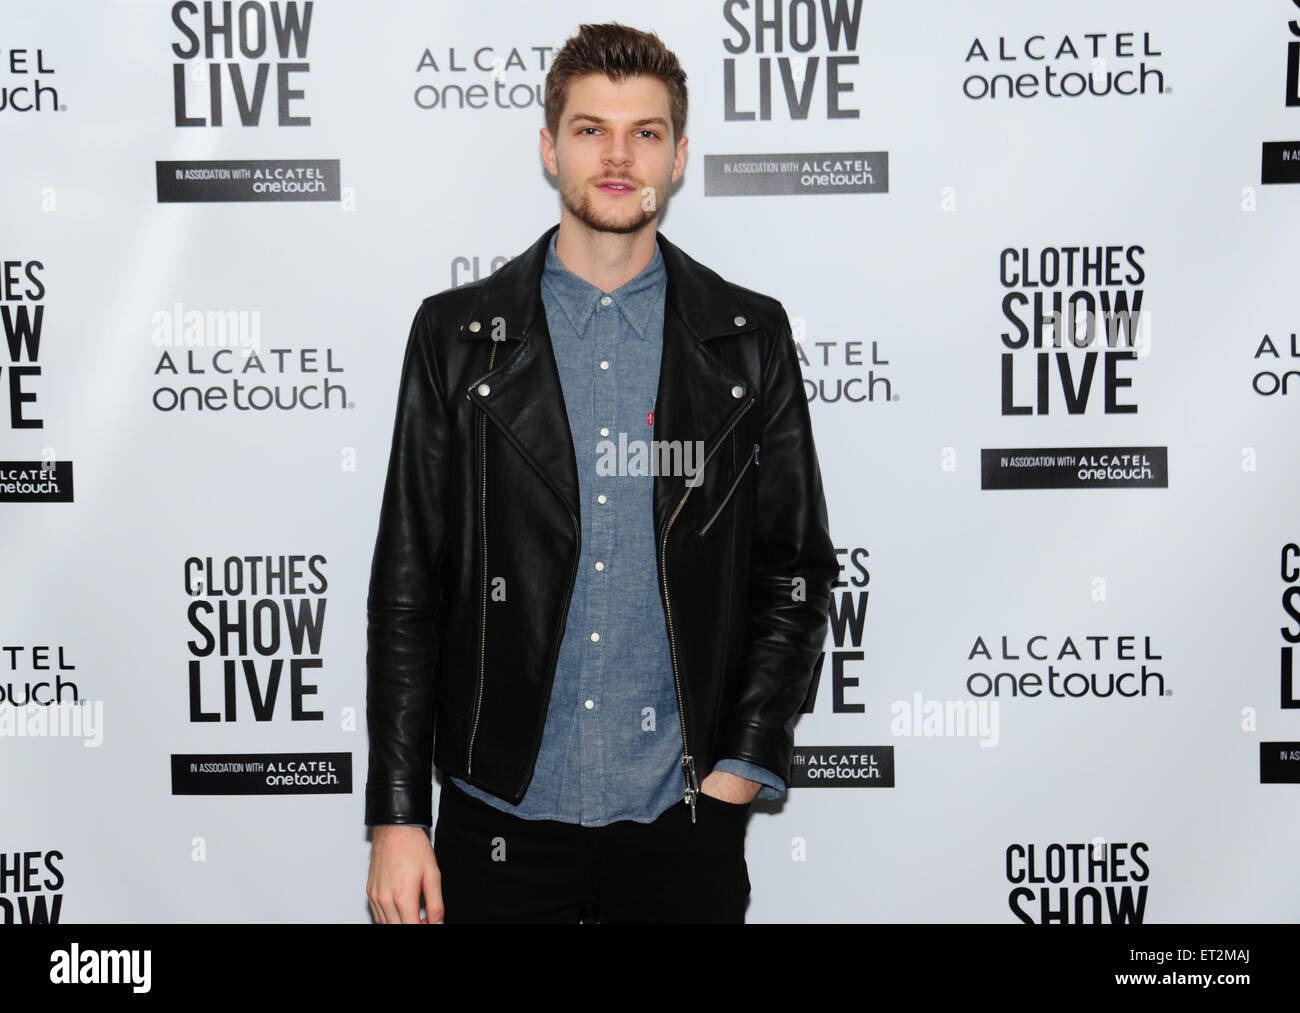 Clothes Show Live 2014 - Day 3  Featuring: Jim Chapman Where: Birmingham, United Kingdom When: 07 Dec 2014 Credit: Anthony Stanley/WENN.com Stock Photo